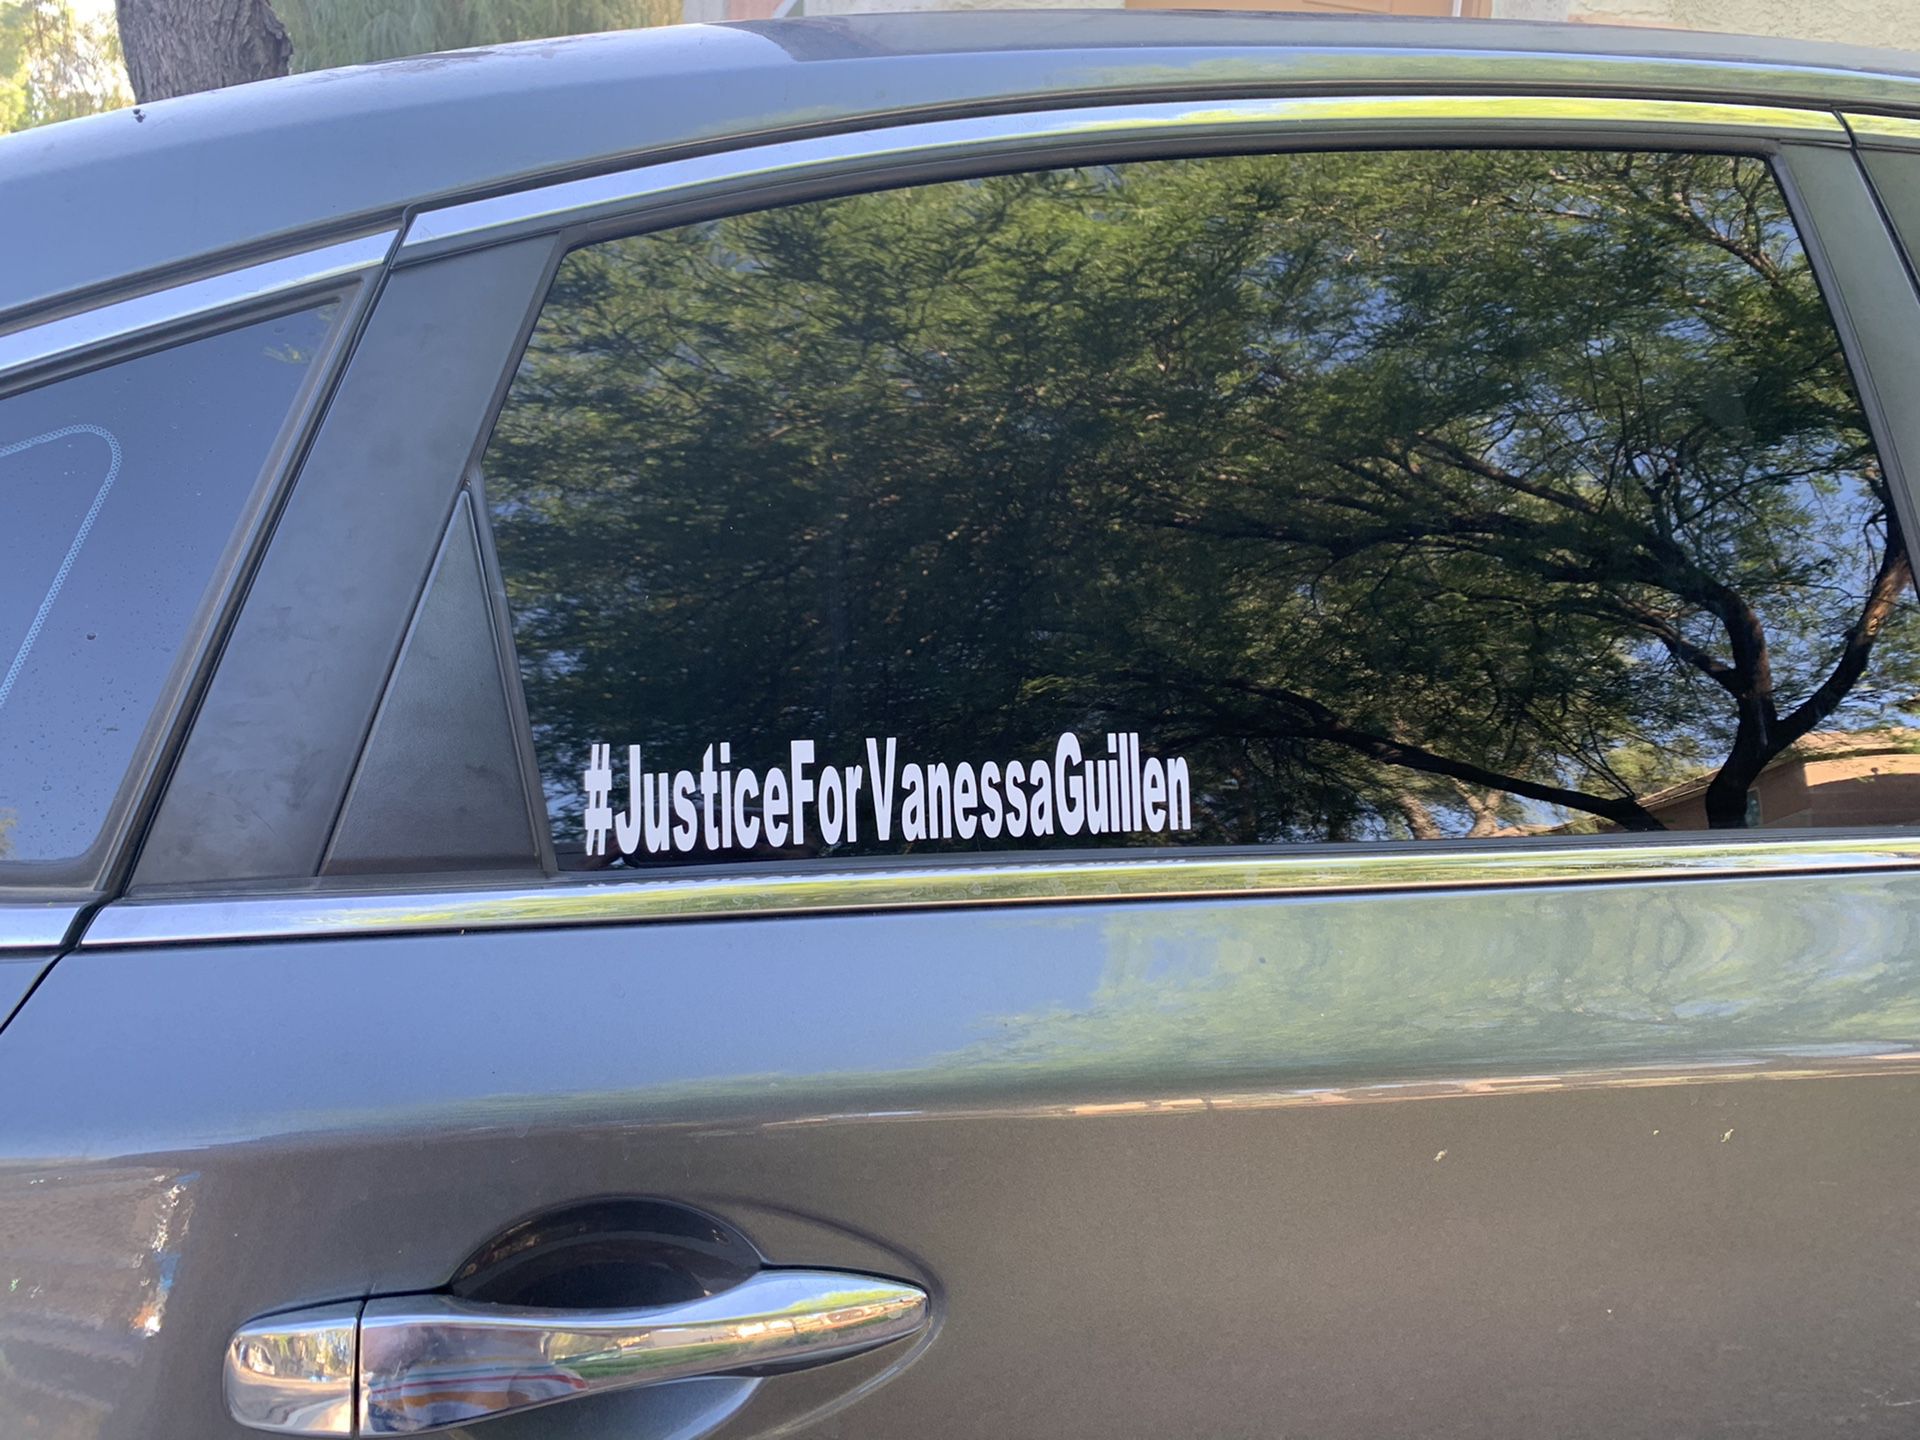 Justice for Vanessa Guillen can decal